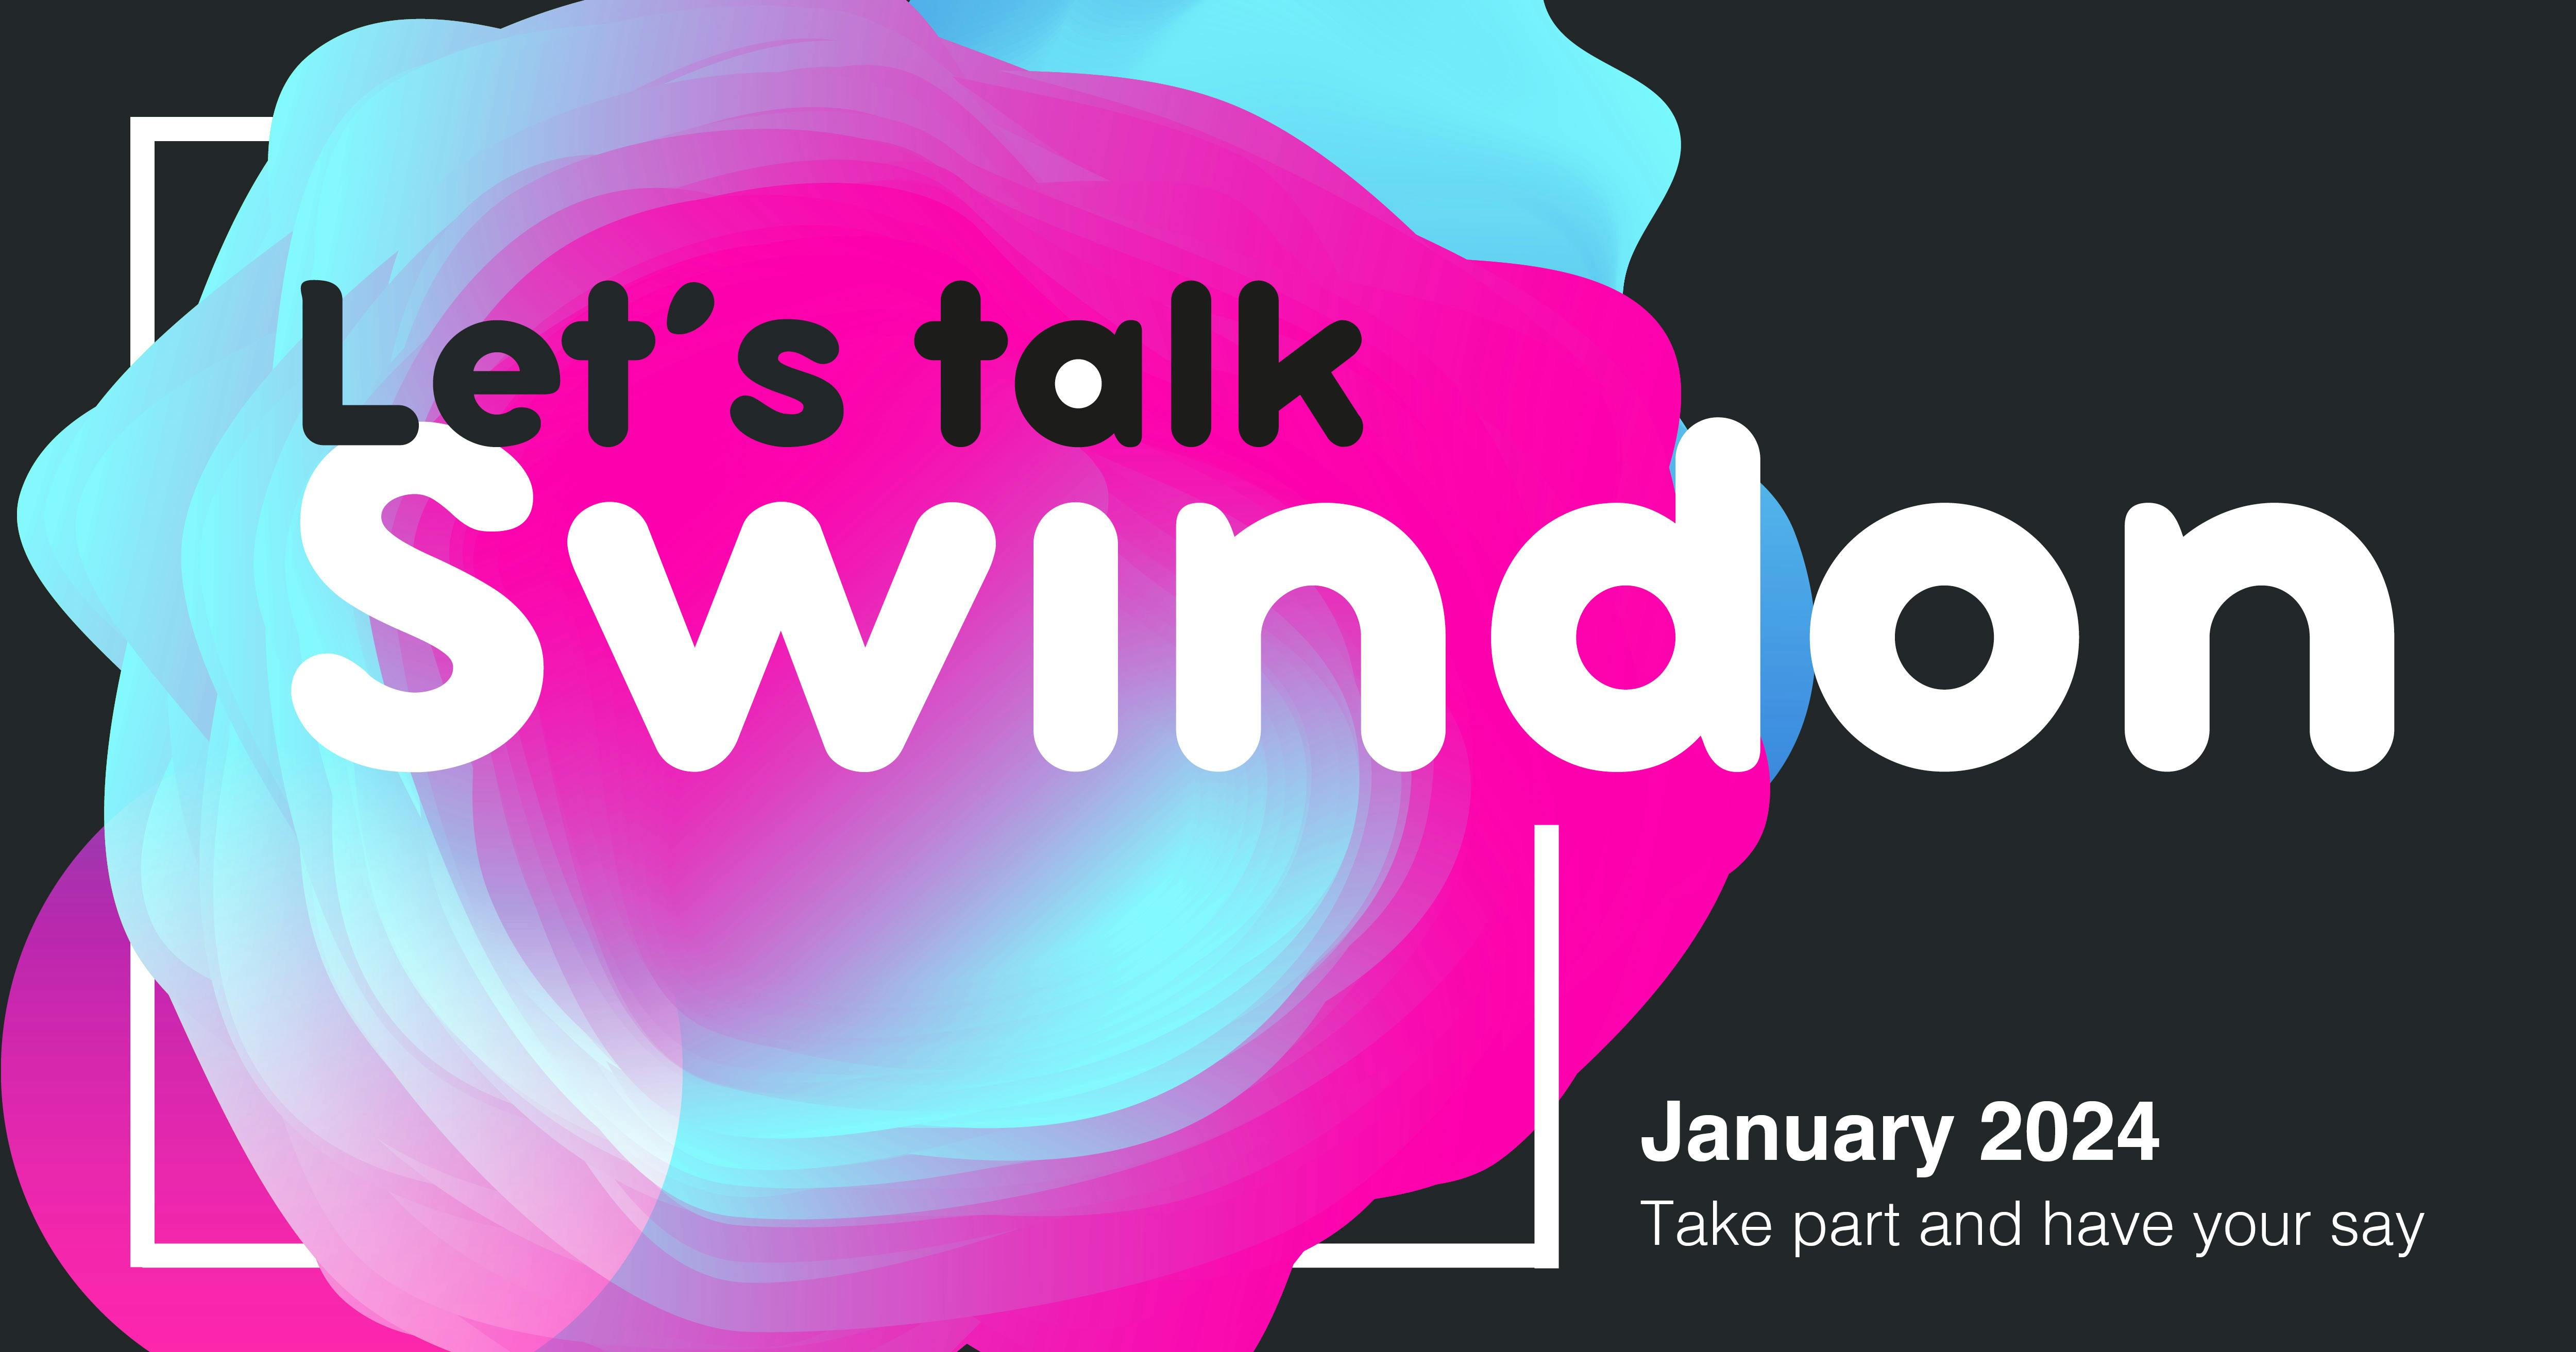 Let's talk Swindon January 2024 take part and have your say